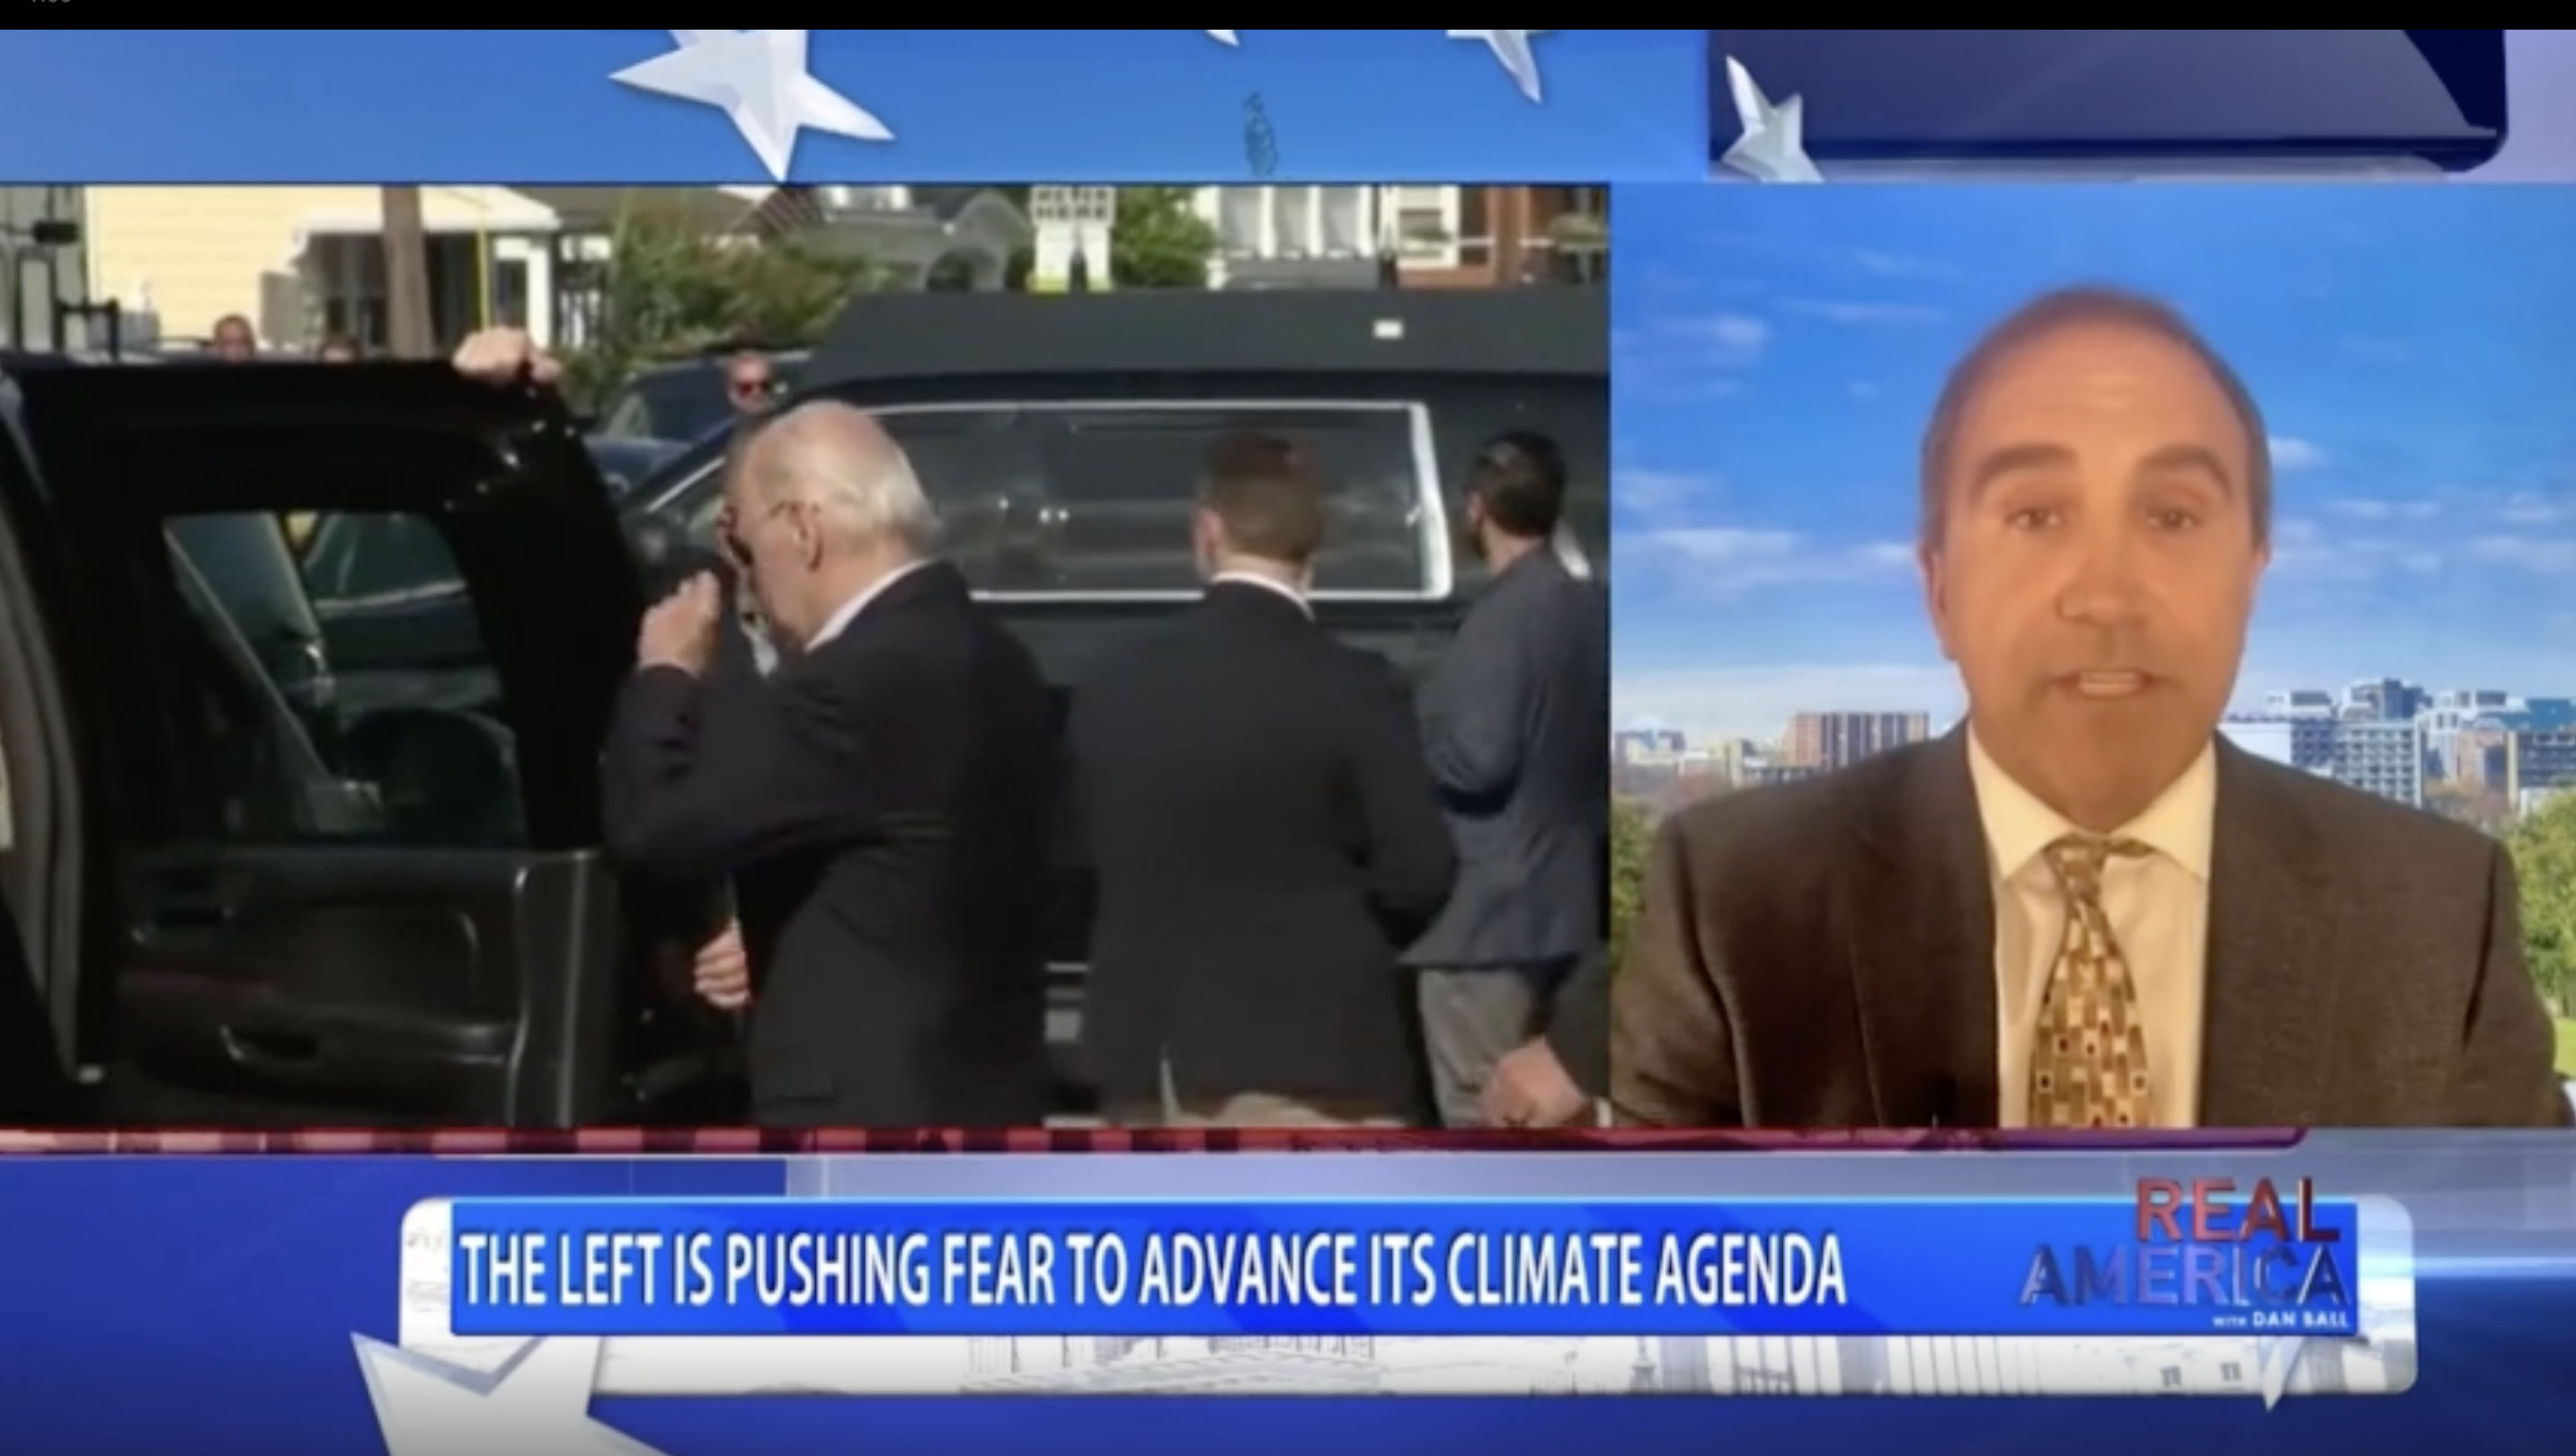 Watch: Morano on OAN TV warns of ‘Climate Emergency’ powers Biden could employ to bypass democracy